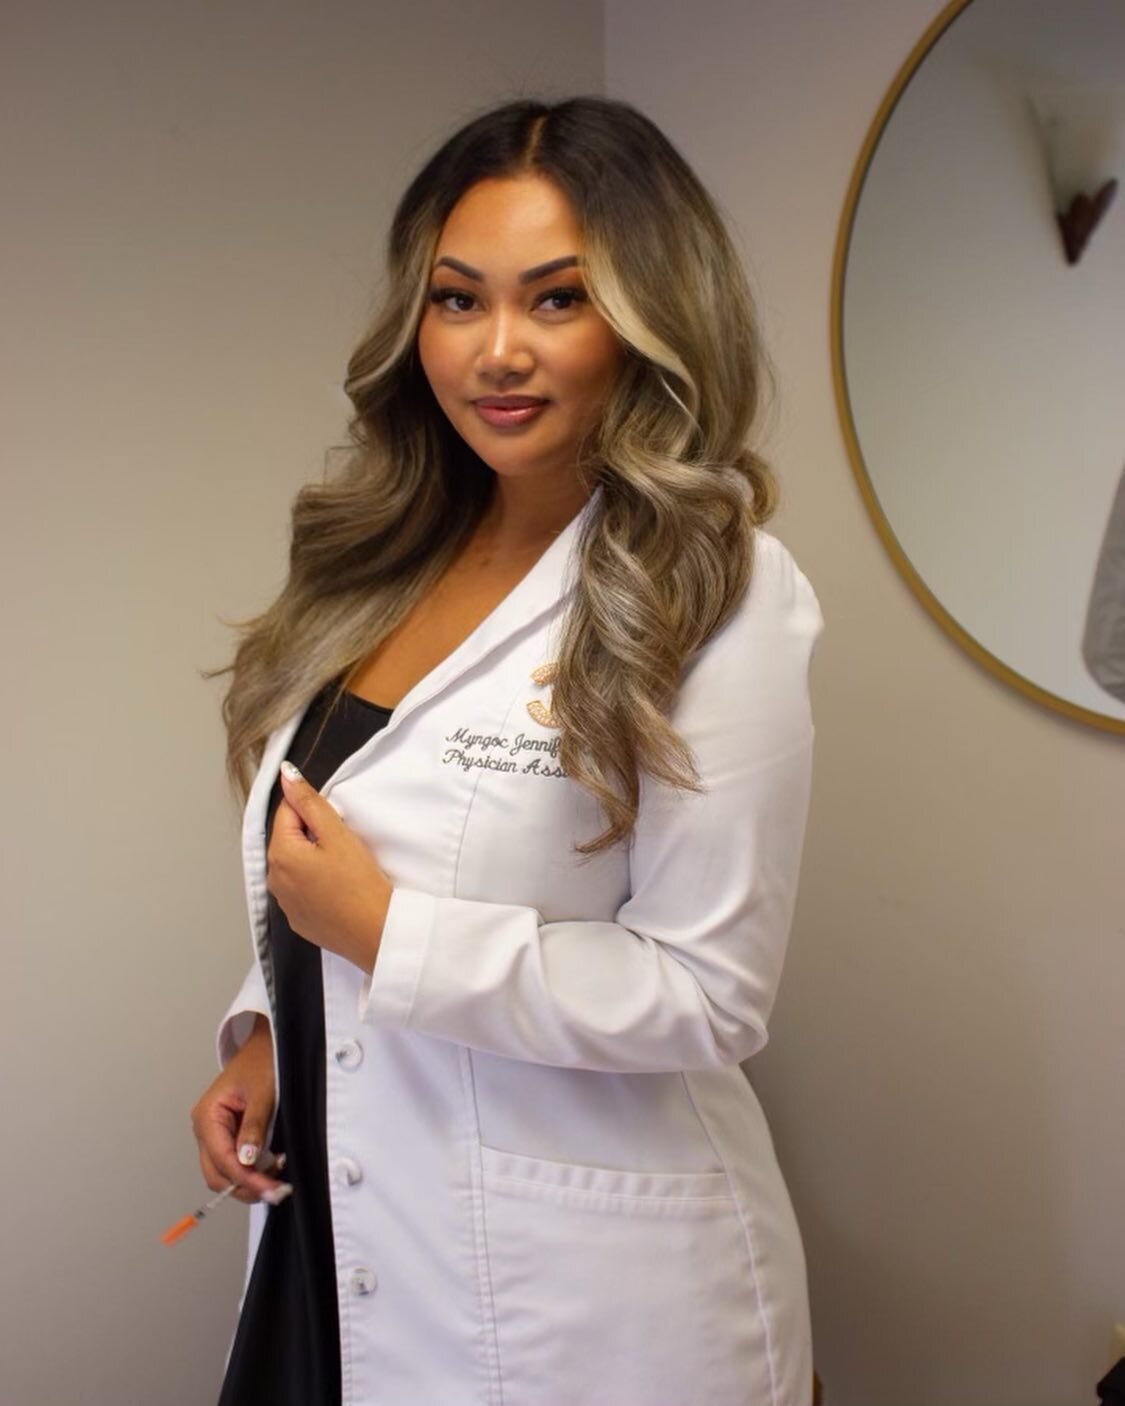 Welcome Myngoc to the Allcroft and Vallon fam! So excited to have another advanced injector taking over Western Ma! We want to extend the celebration to our patients by offering special pricing to see Myngoc during her first month! Tune in Monday for